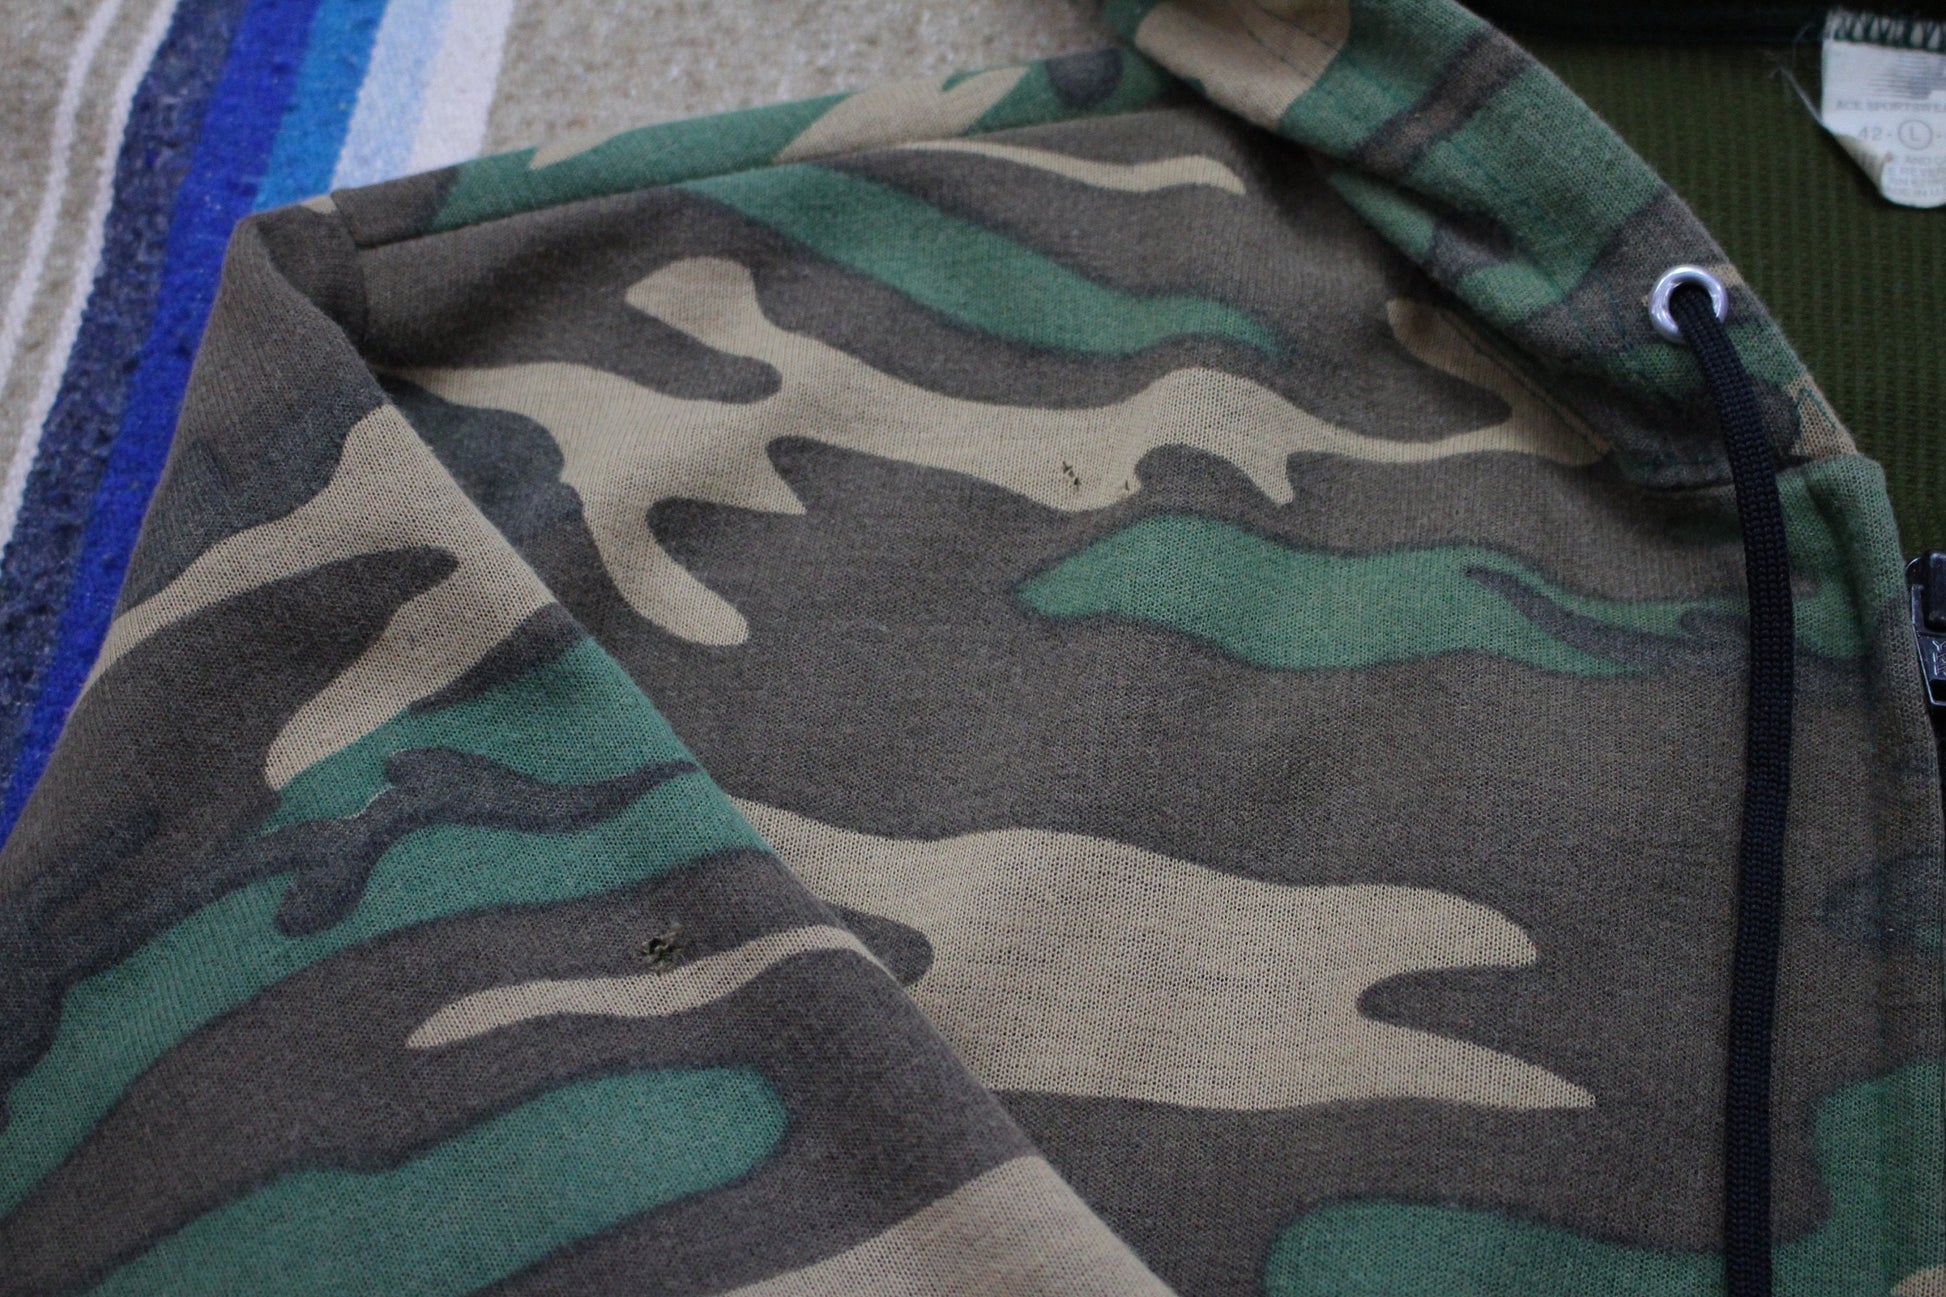 1980s/1990s Ace Sportswear Camo Lightweight Thermal Lined Zip-Up Hoodie Sweatshirt Made in USA Size L